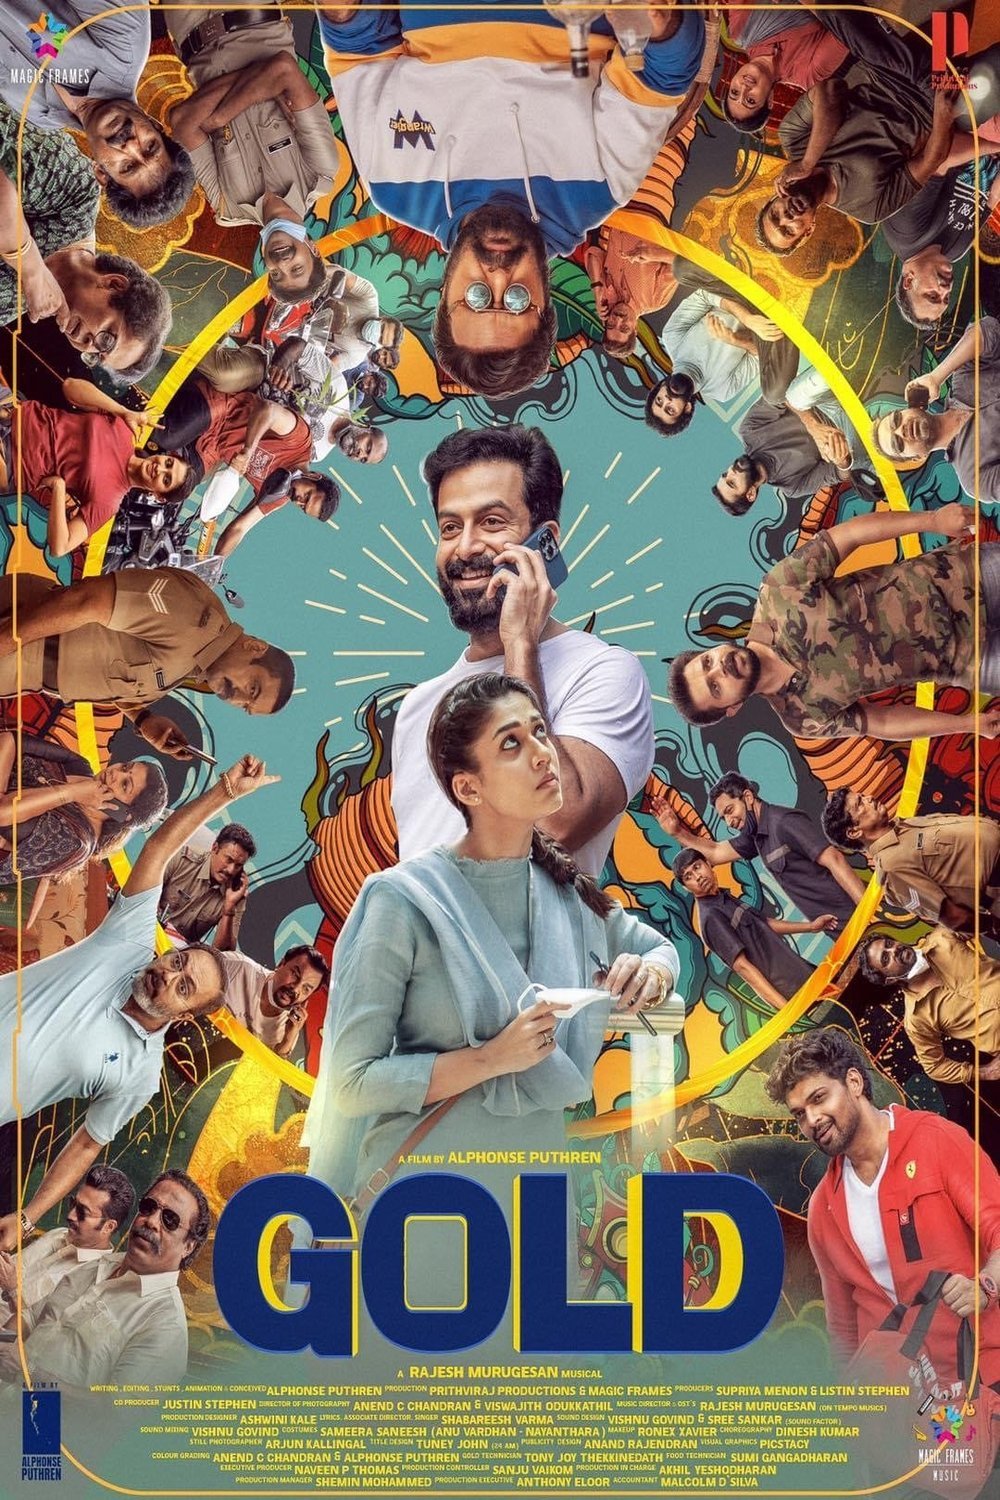 Malayalam poster of the movie Gold